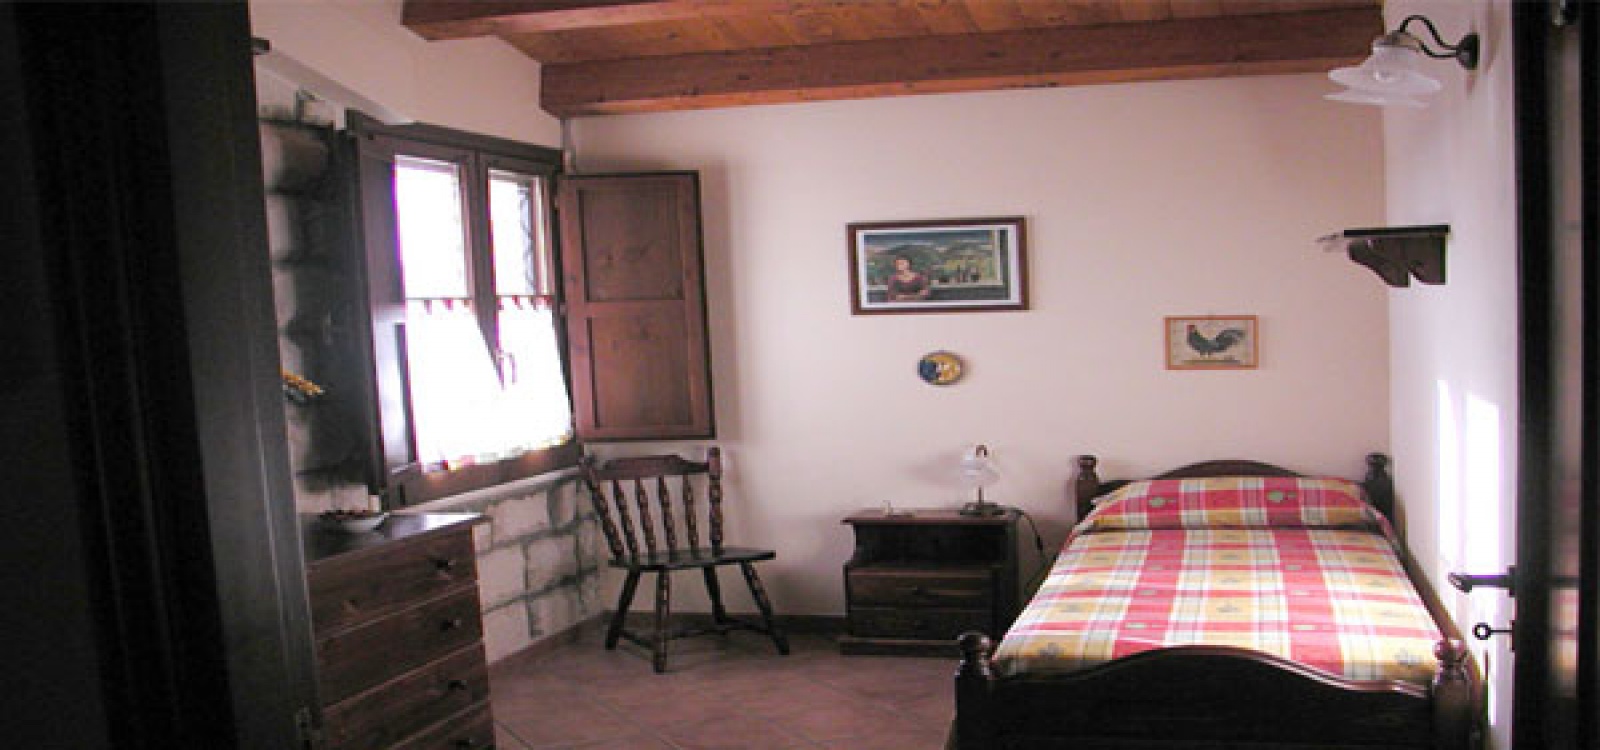 SP 14,Canicattini,96100,Bed and breakfast,SP 14,2160